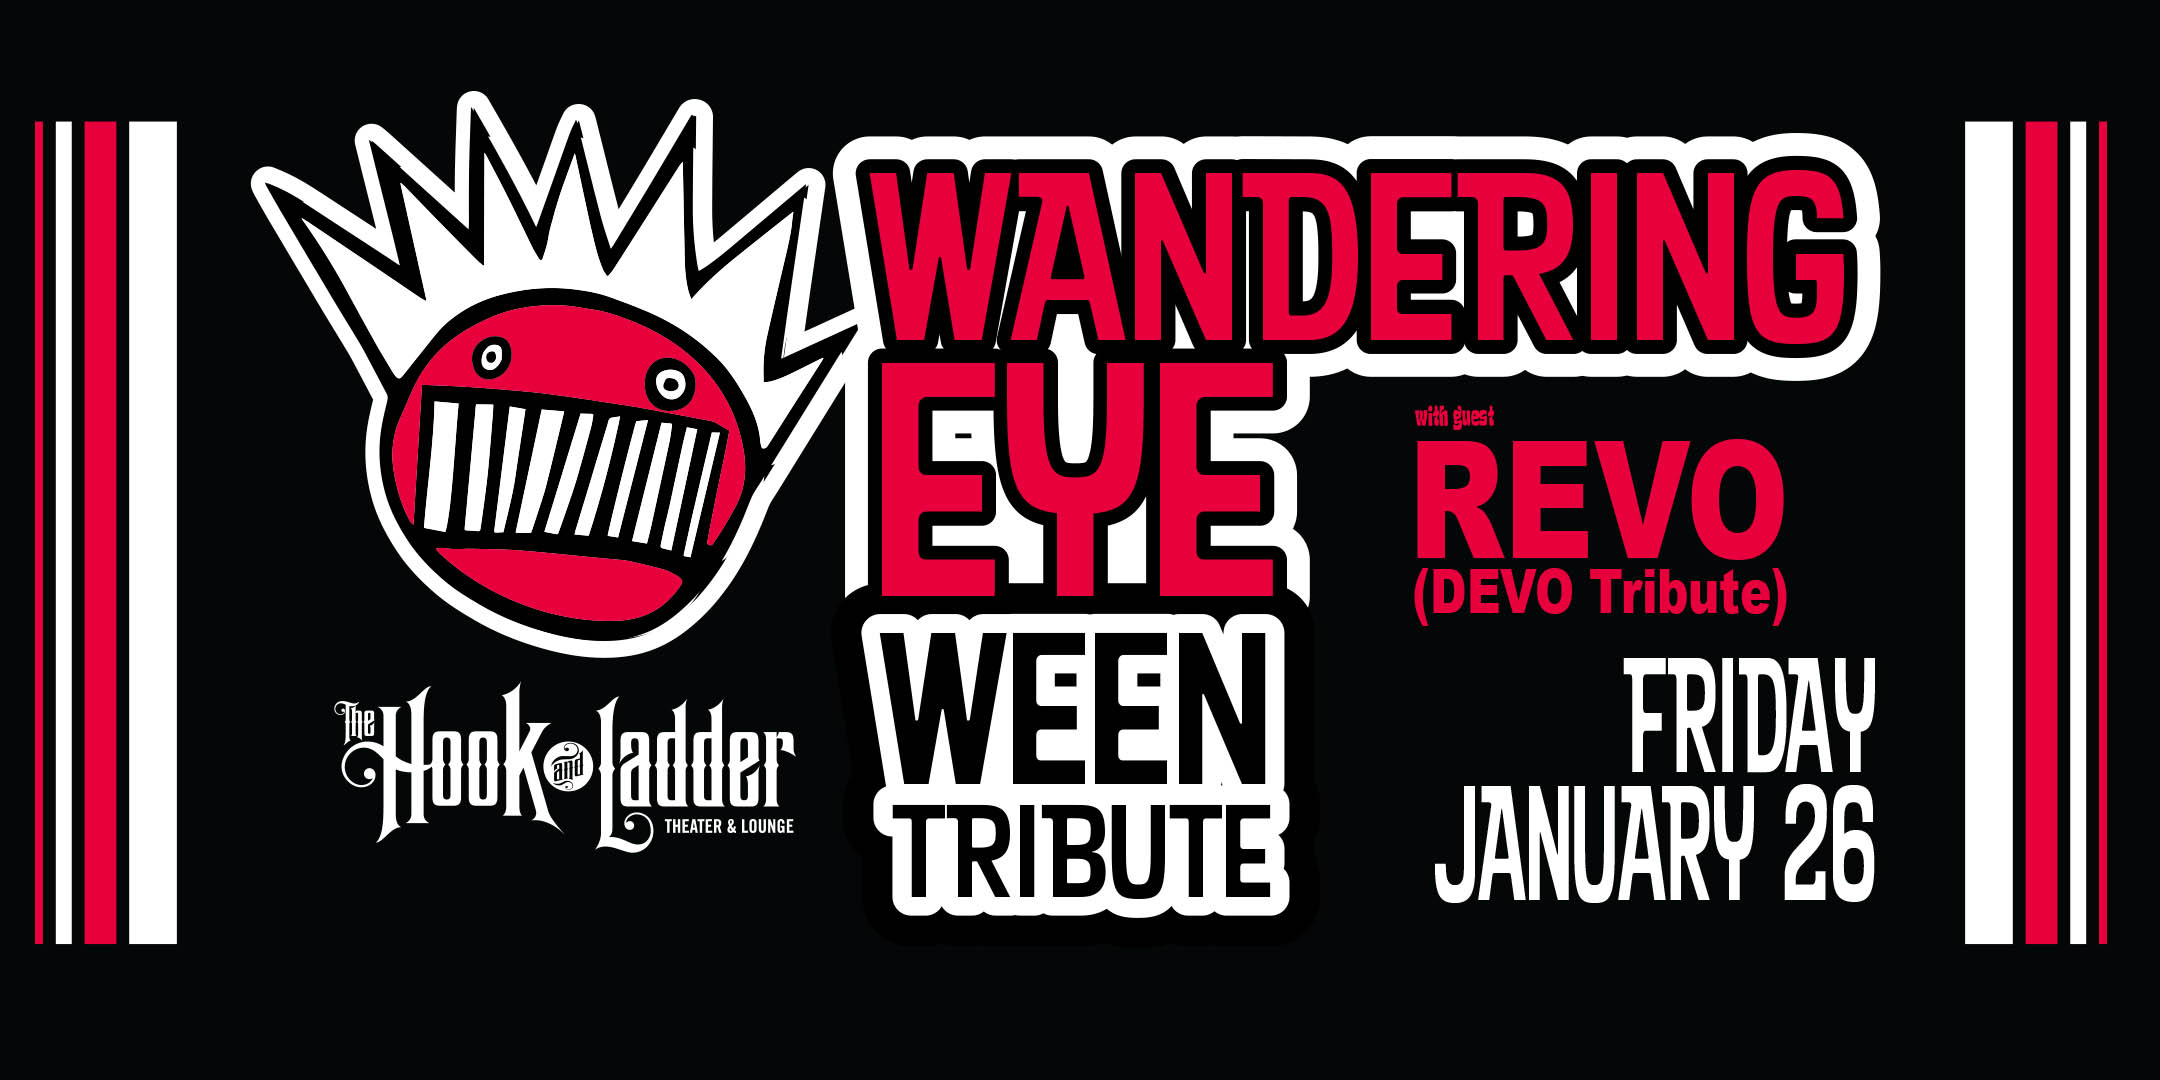 Wandering Eye (WEEN Tribute) with REVO (DEVO Tribute) Friday, September 29 Friday, January 26 - **NEW DATE** The Hook and Ladder Theater Doors 7:30pm :: Music 8:00pm :: 21+ $15 ADV / $20 DOS